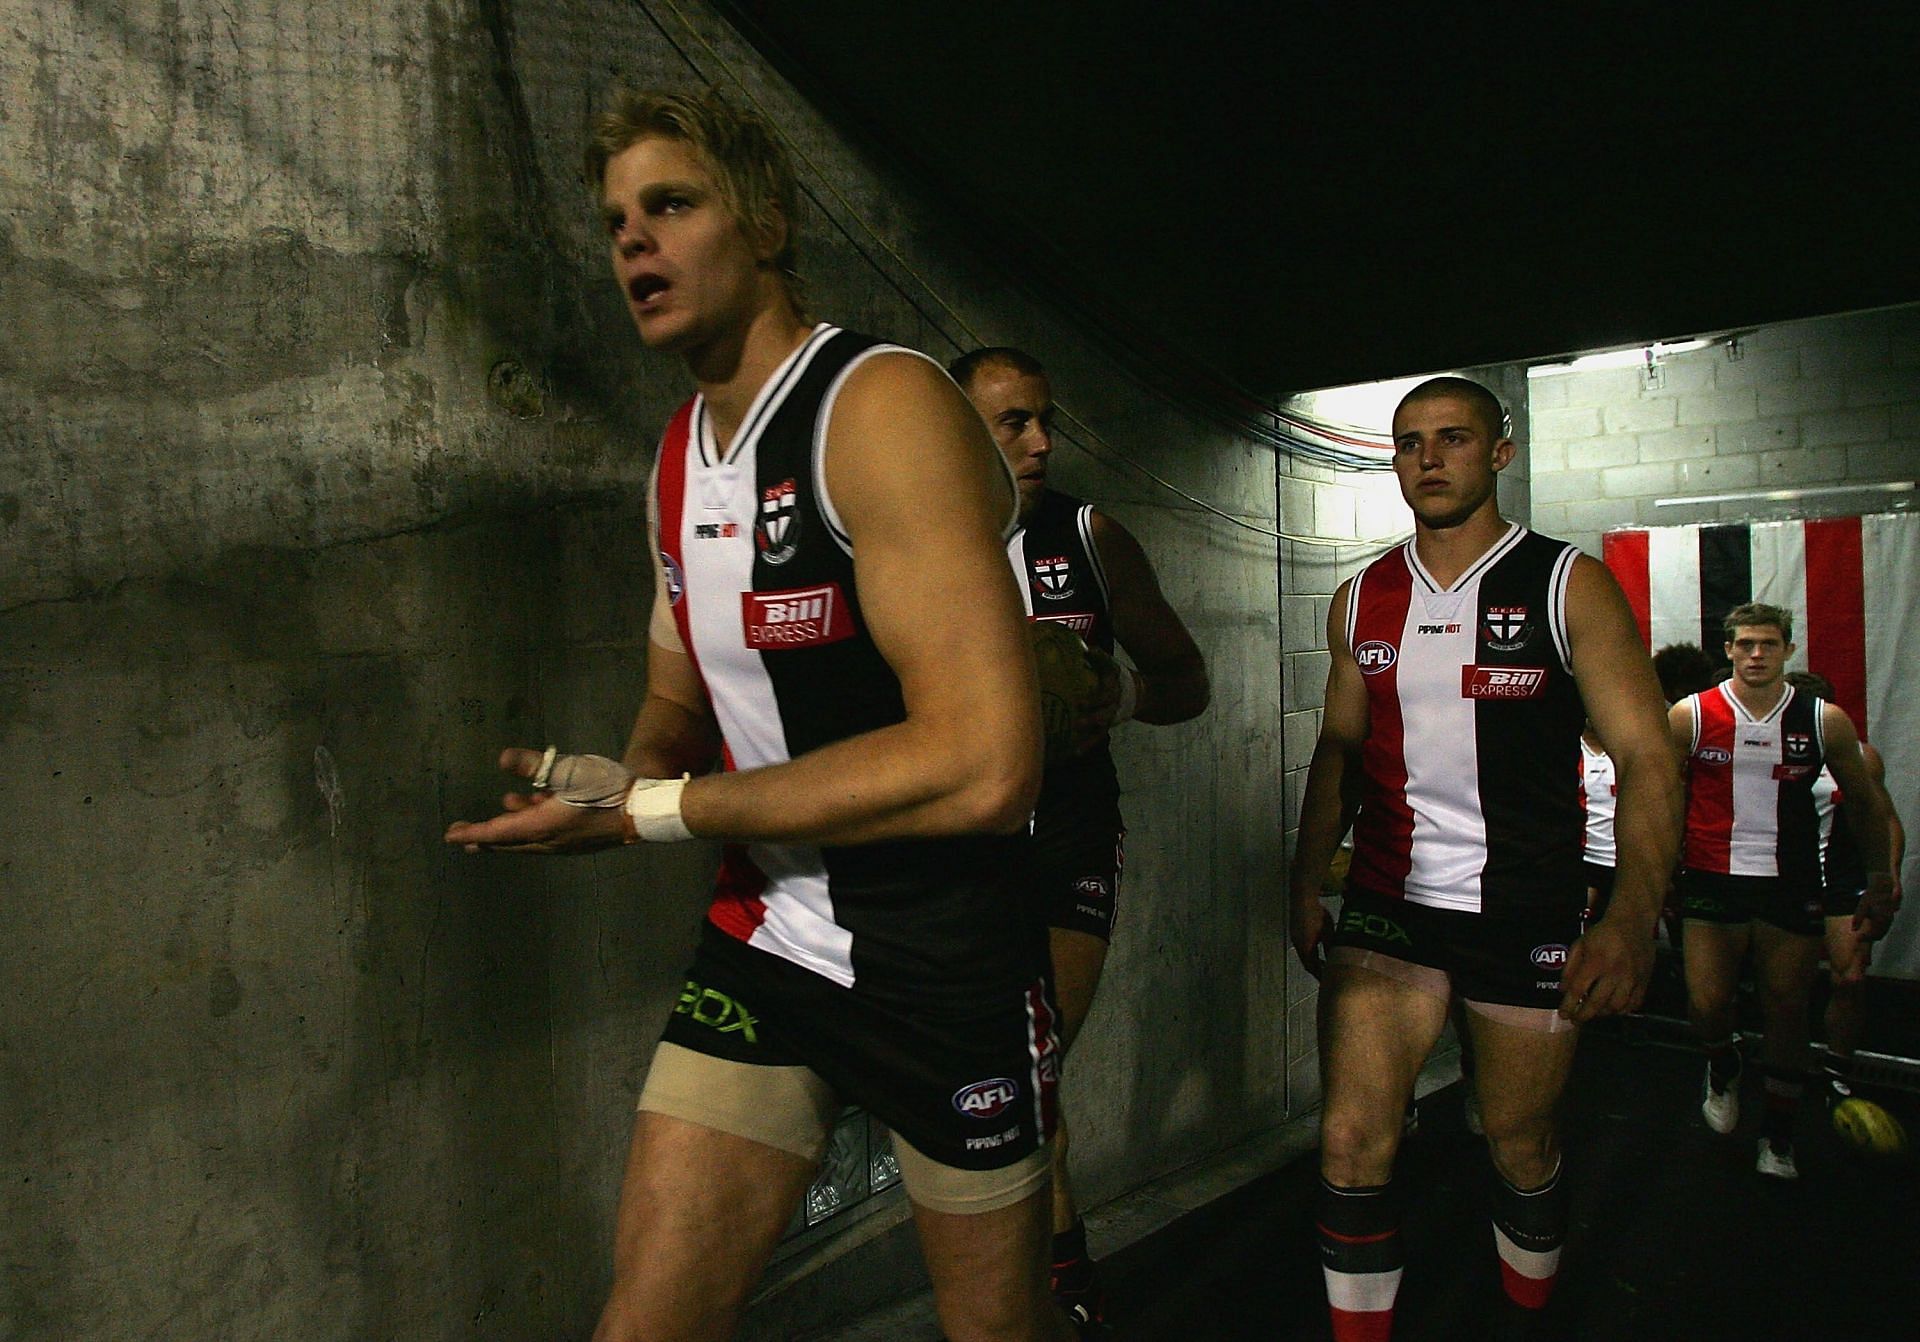 Nick Riewoldt #12 and captain of the Saints leads his team for the AFL Preliminary Final match between the St Kilda Saints and the Sydney Swans in 2005